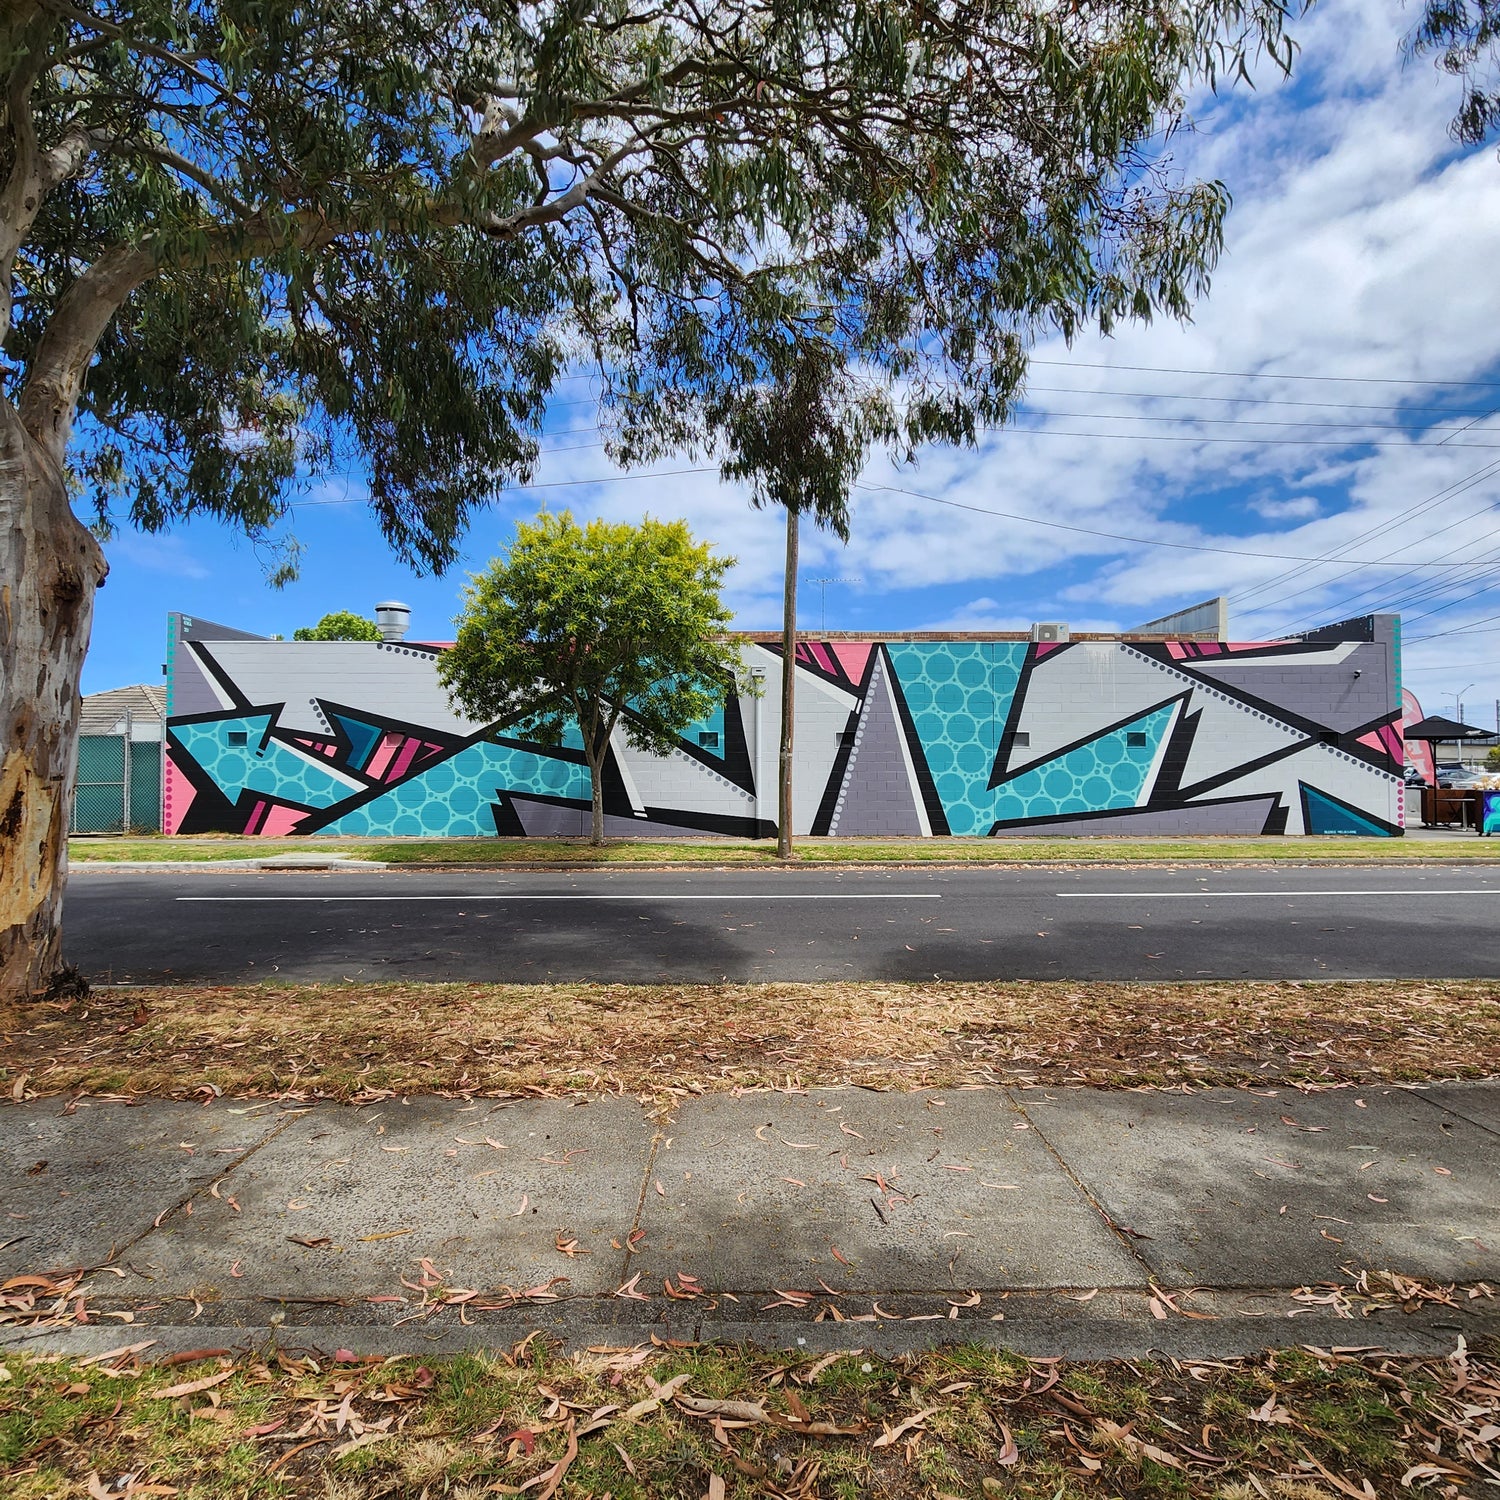 Large wall mural by Silence Melbourne - located in Frankston 